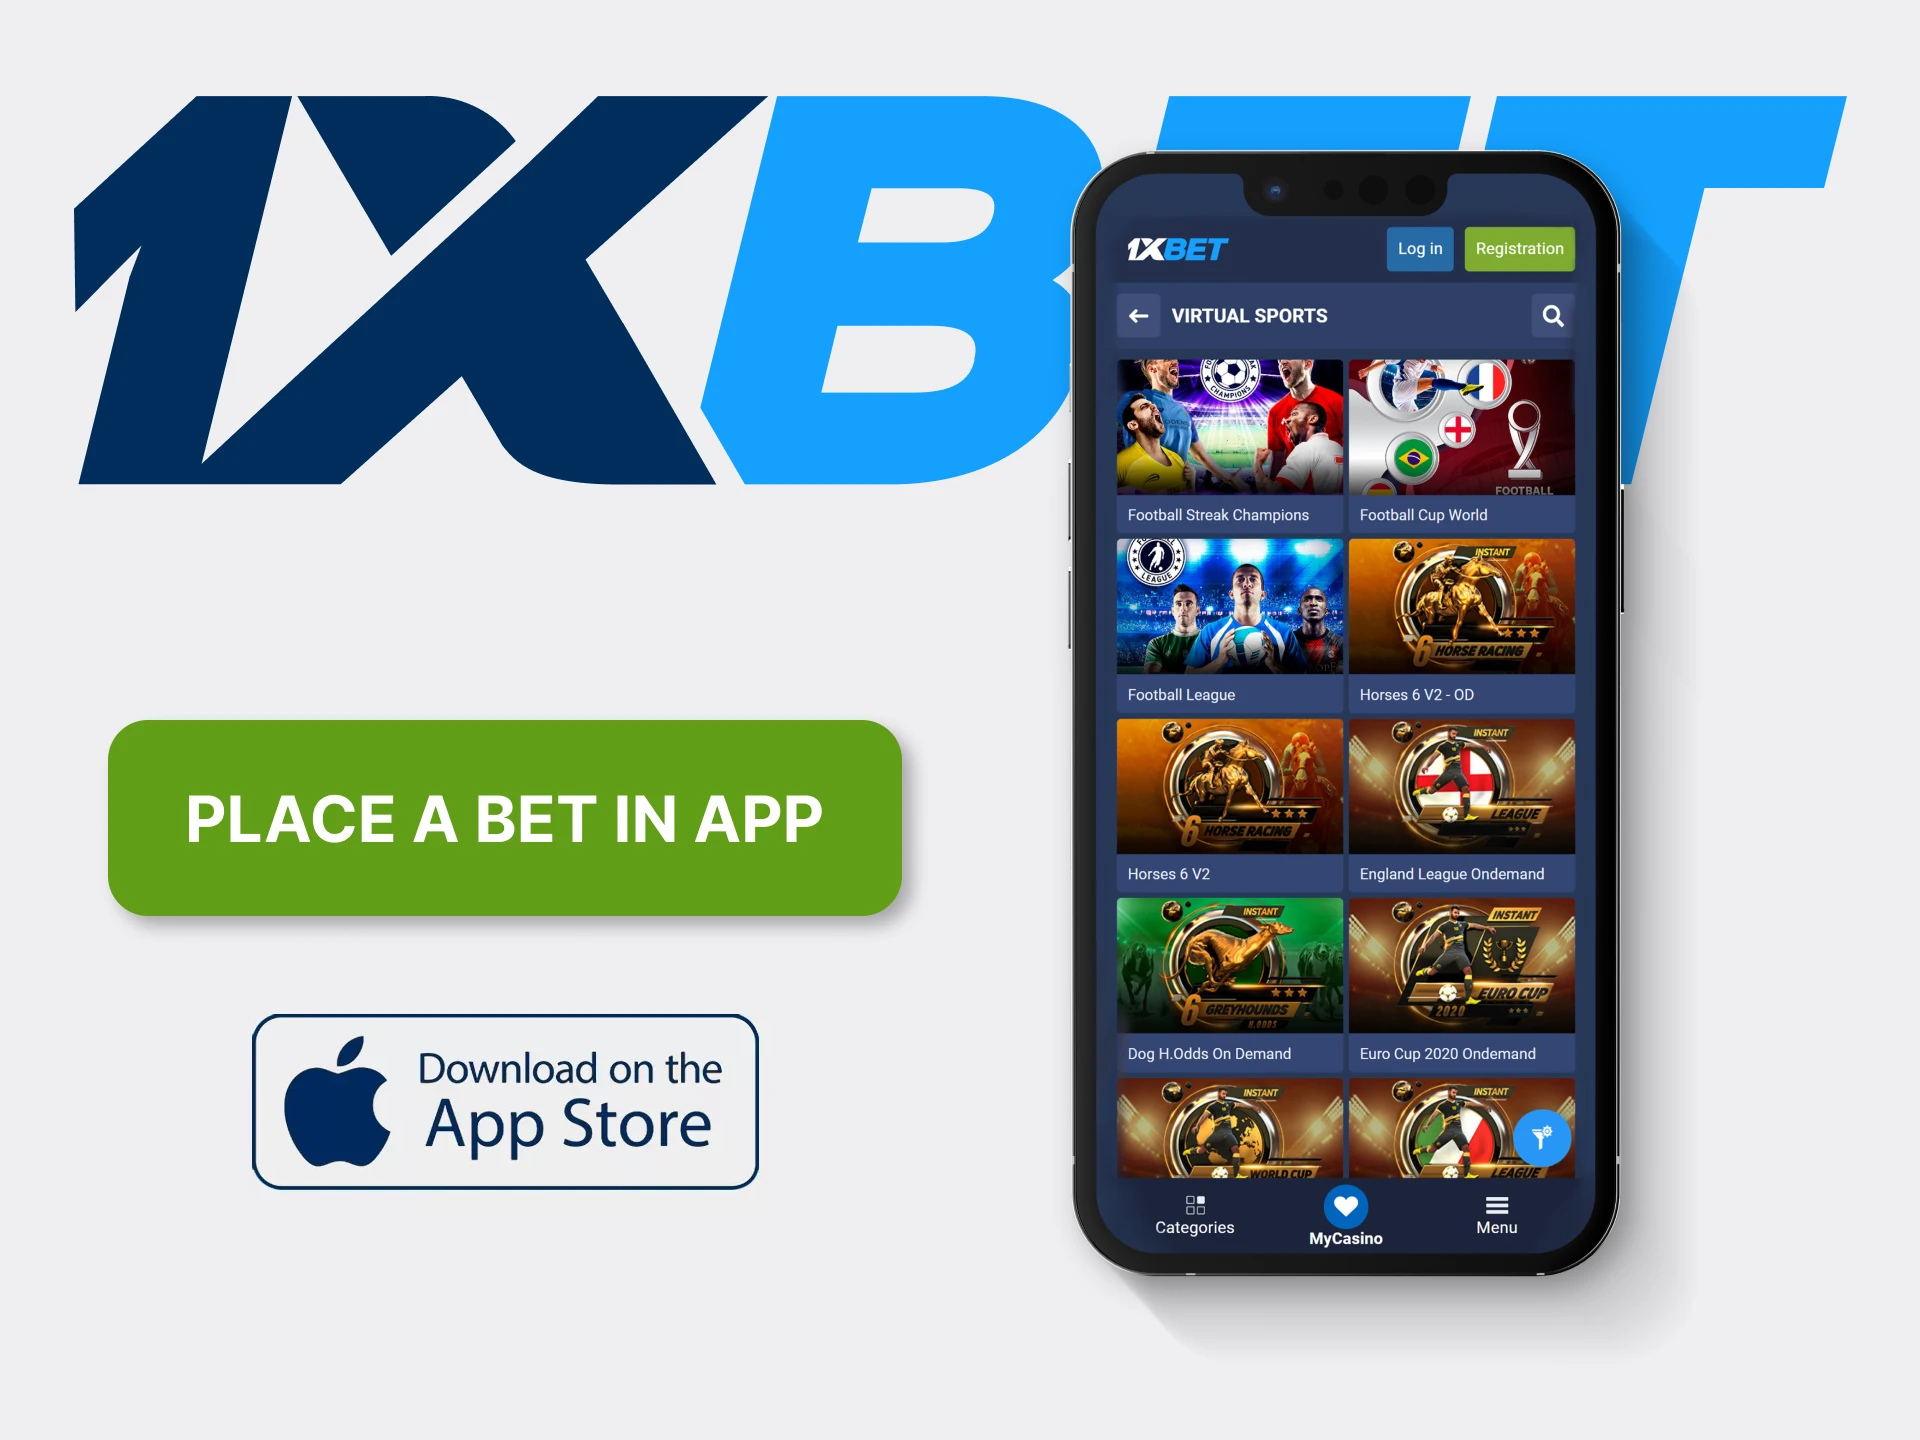 Install the 1xBet virtual sports betting app on your iOS phone.